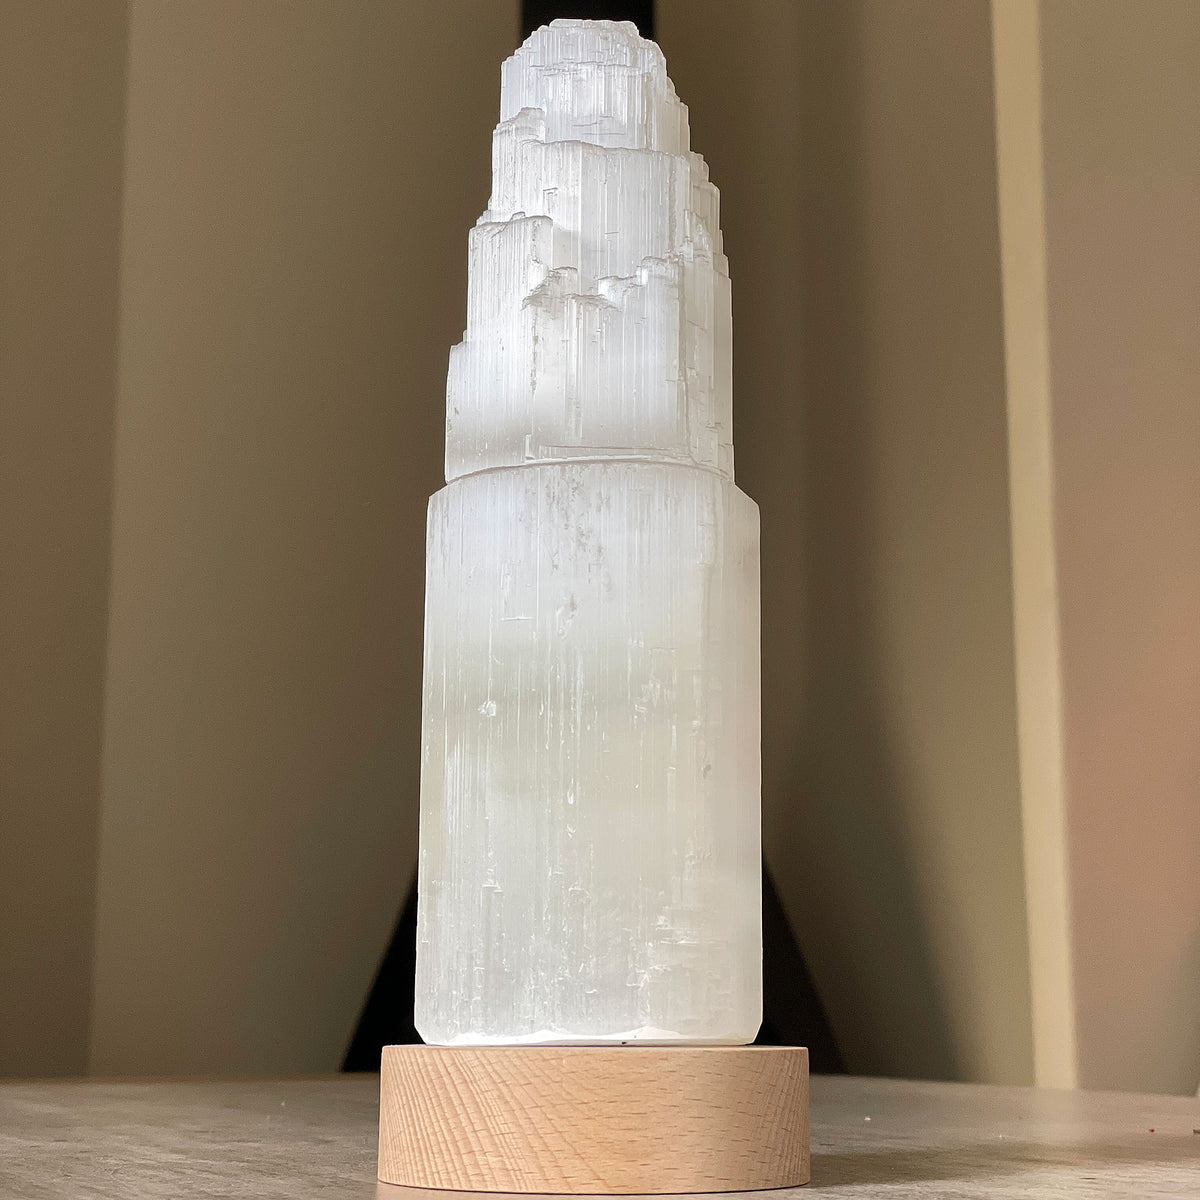 Selenite Lamp - Tower Large - Selenite is a beautiful and versatile crystal that offers numerous benefits, making it a popular choice for both decor and holistic purposes. Its natural beauty and unique translucent appearance make it an eye-catching addition to any home. Selenite emits a soft and warm glow, which makes it an excellent choice for a night light.